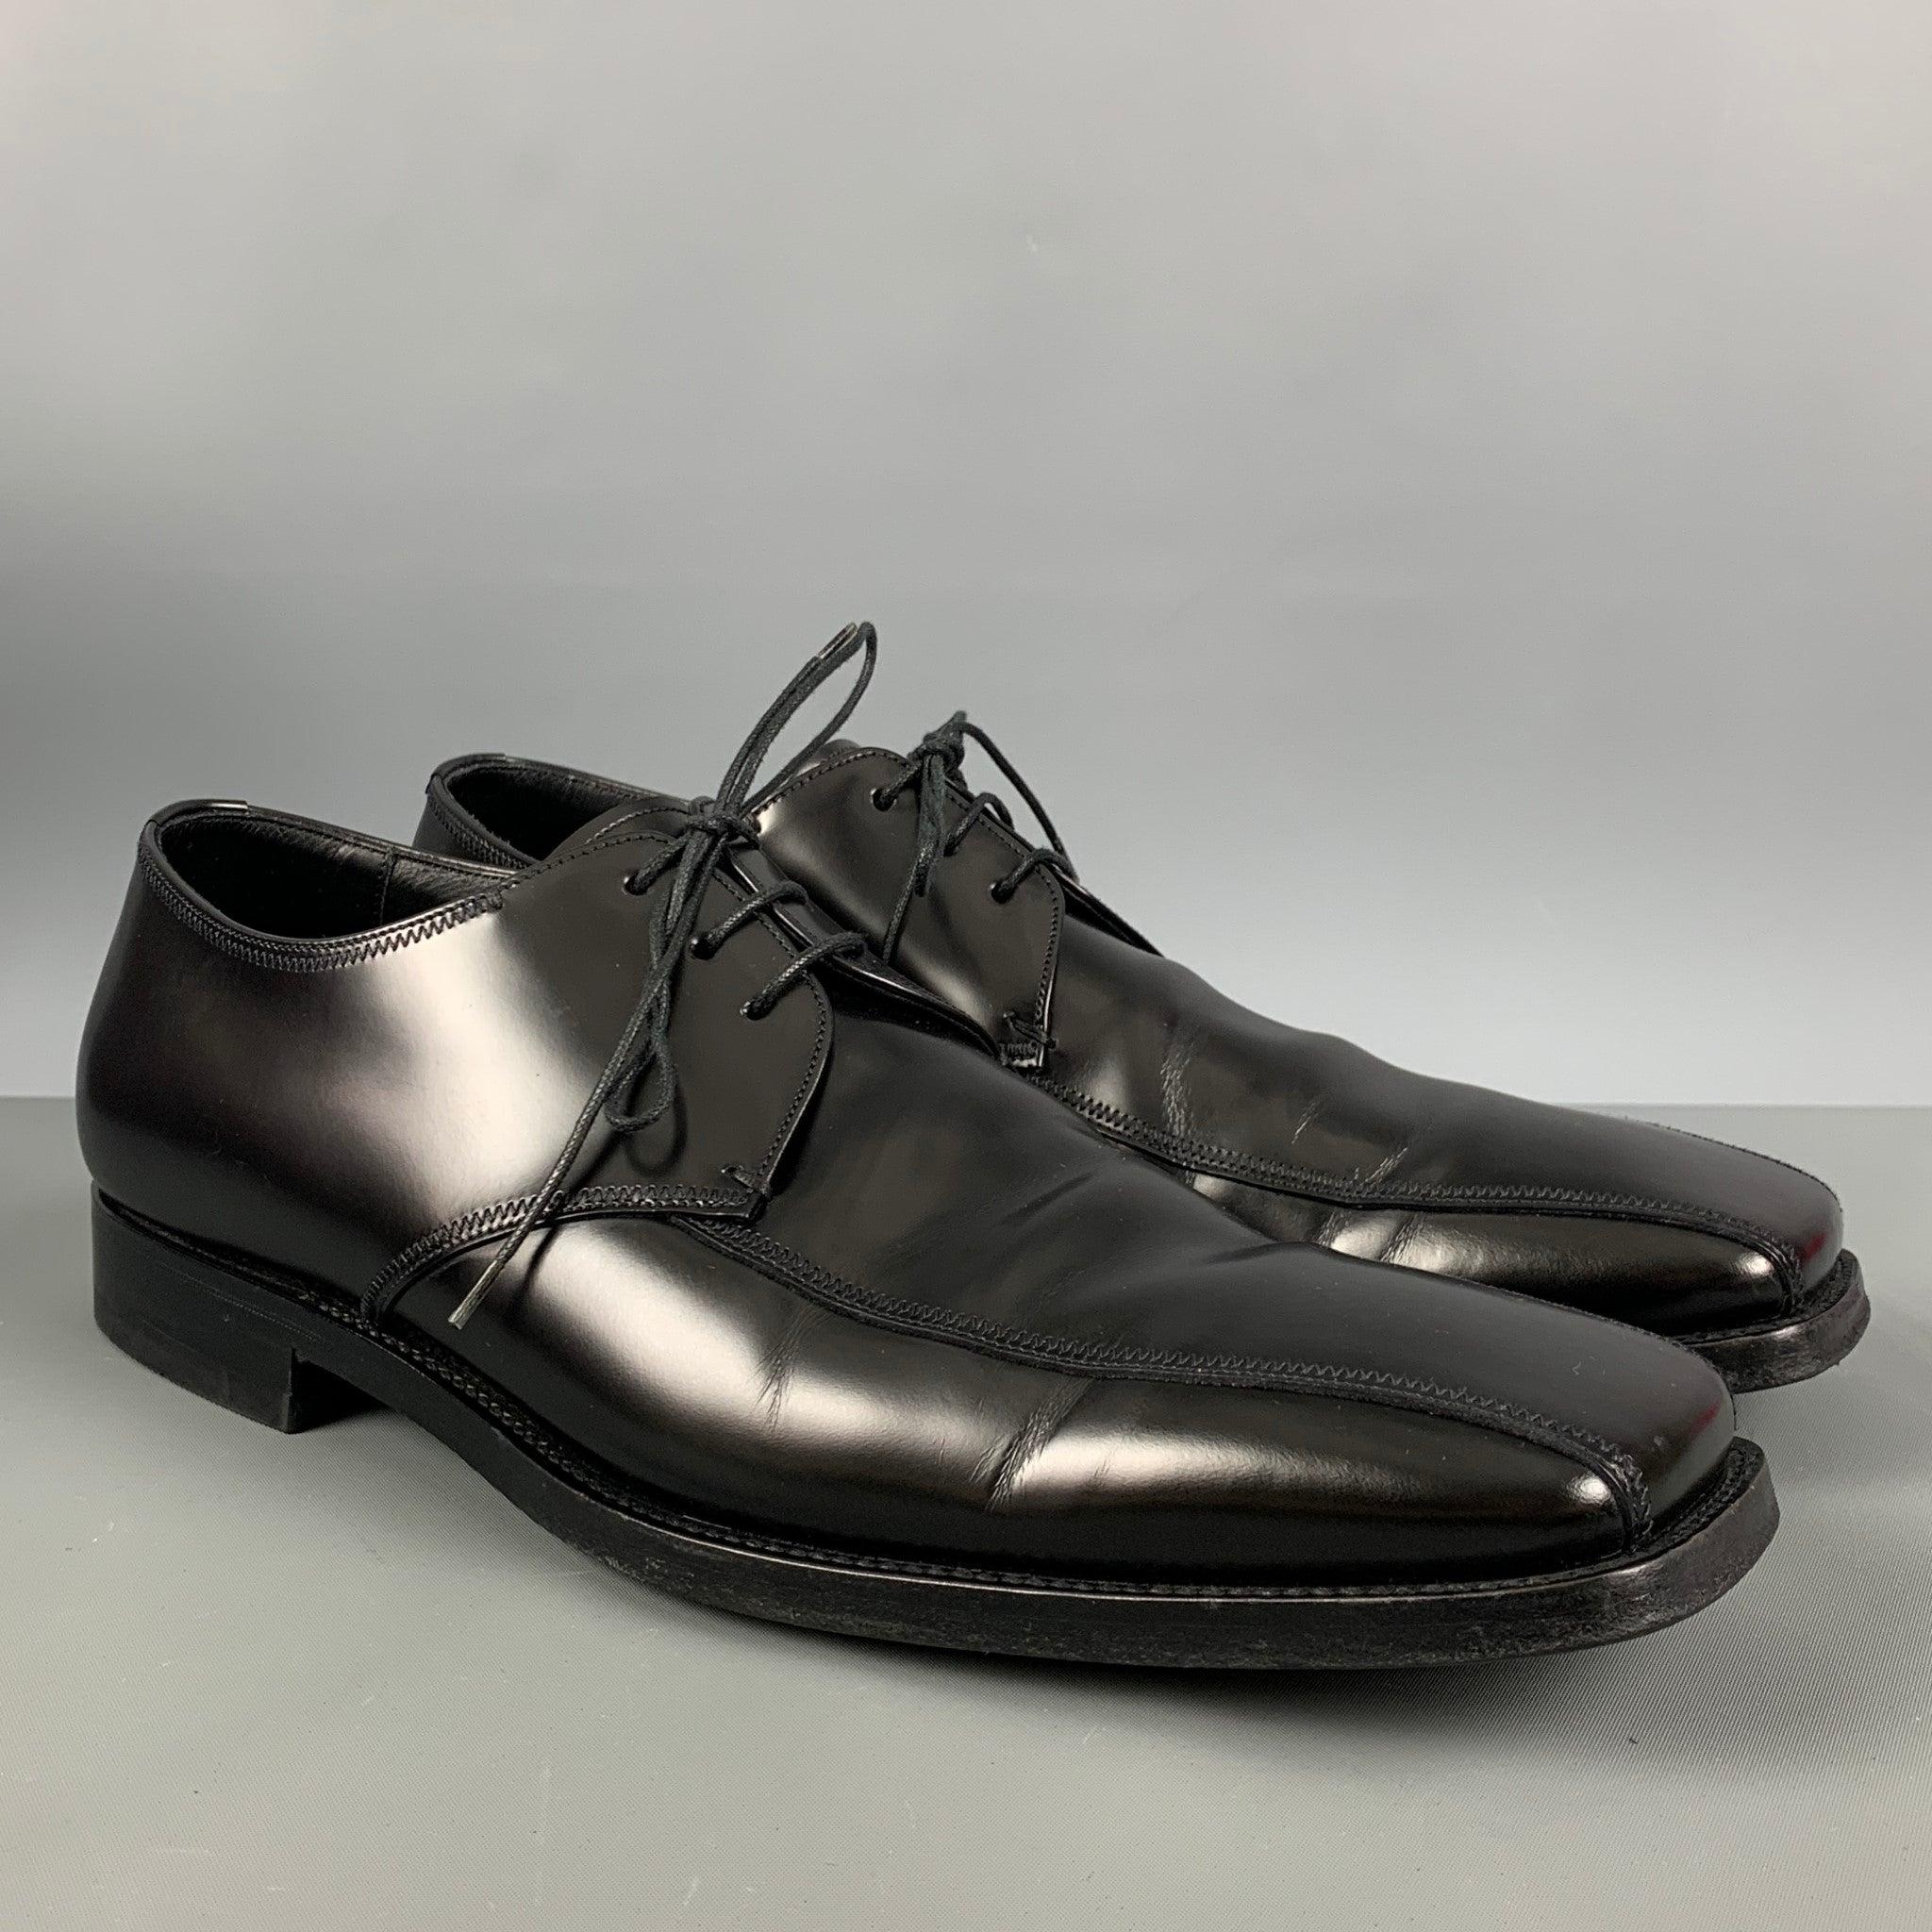 PRADA shoes comes in a black leather featuring a classic style, square toe, and a lace up closure. Includes box. Made in Italy. Excellent Pre-Owned Condition. 

Marked:   2E 1066 6360 9 1/2Outsole: 13 inches  x 4.25 in
  
  
 
Reference: